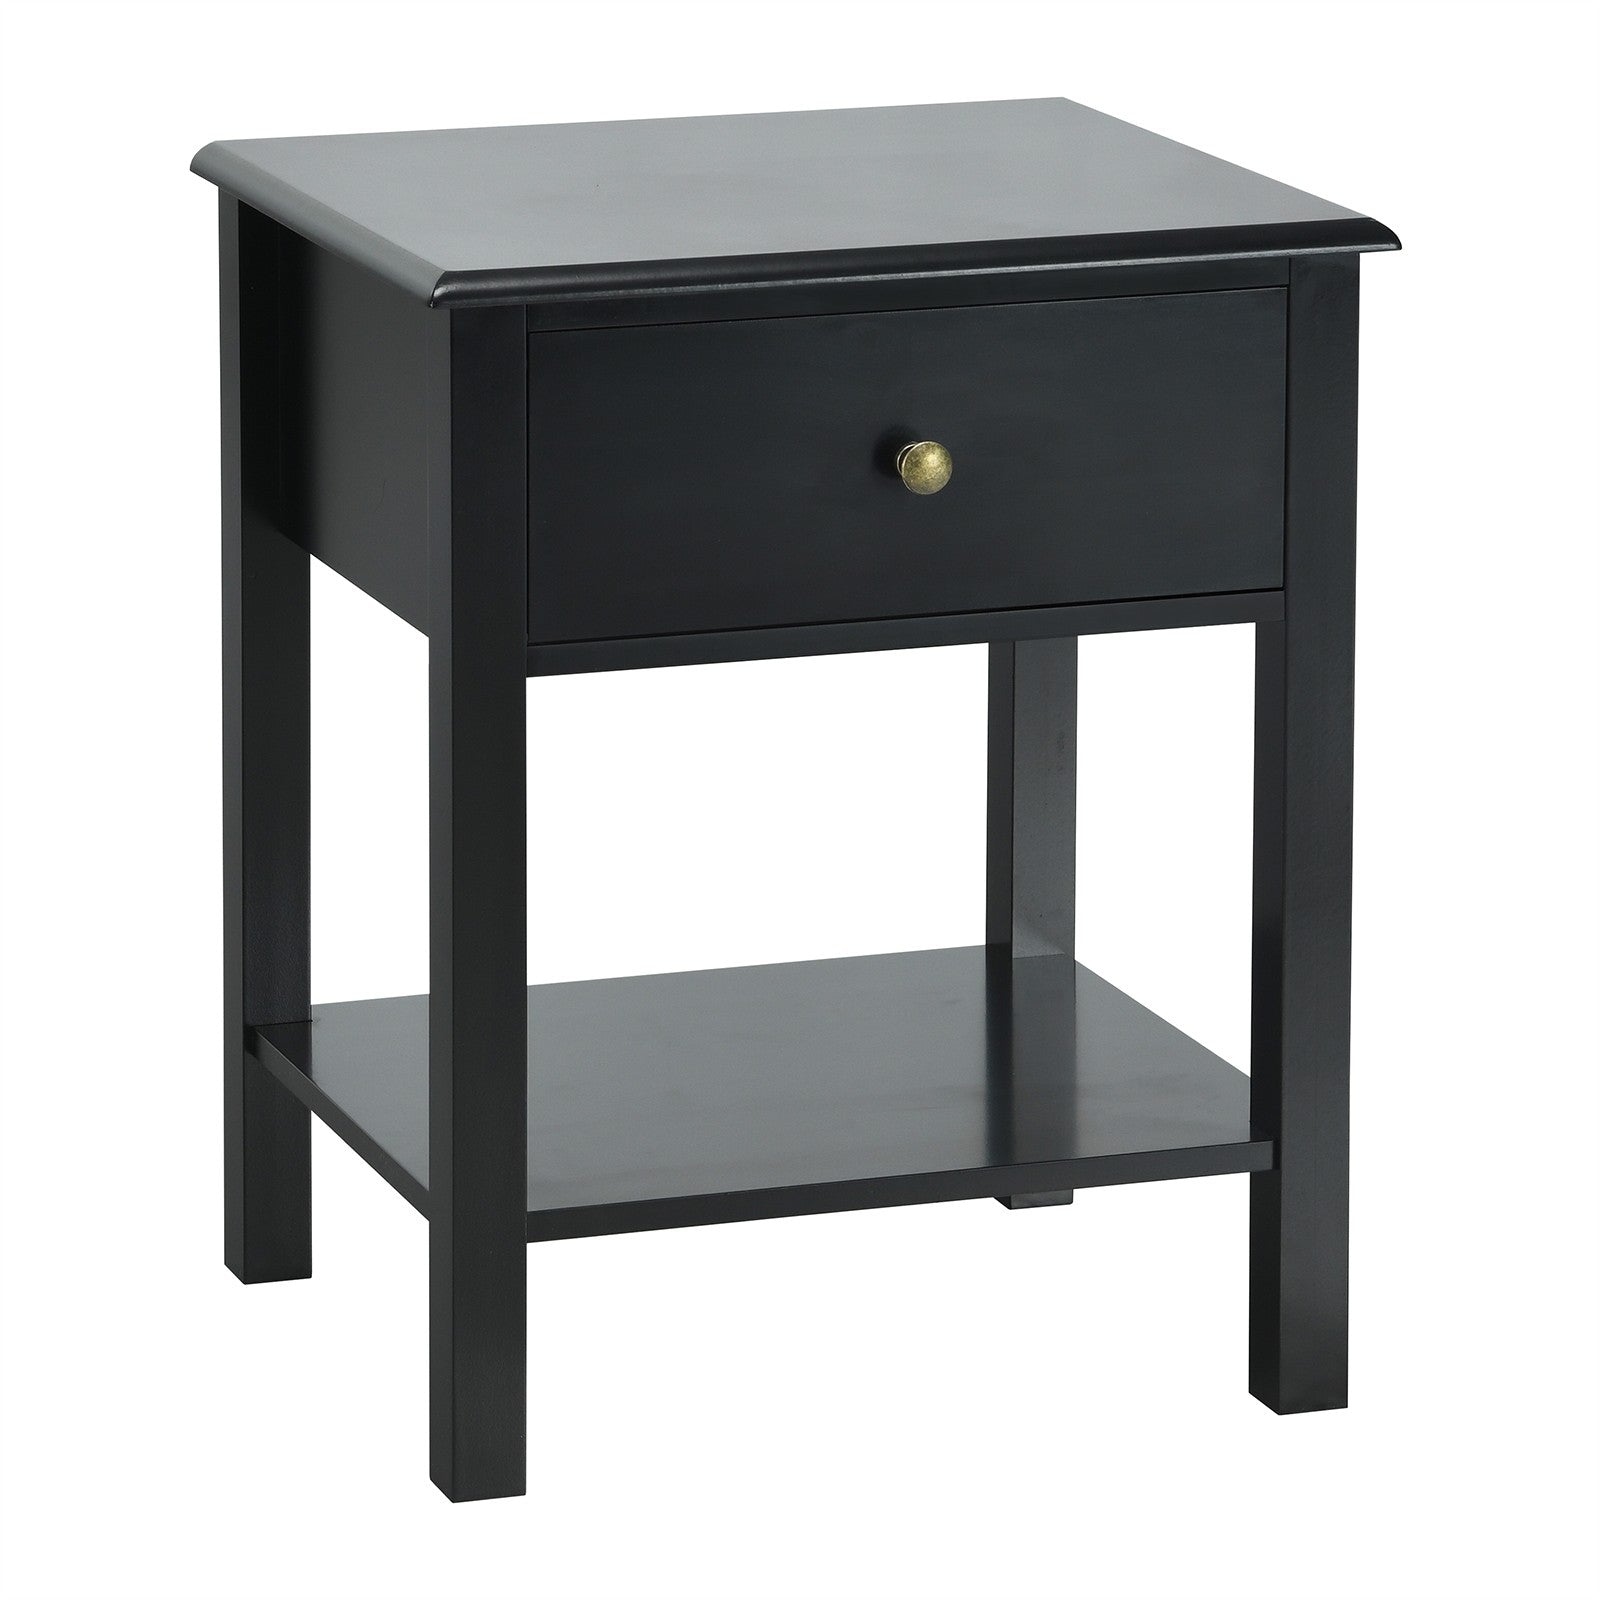 Giantex Nightstand W/Drawer and Shelf, Stable Frame Storage Cabinet